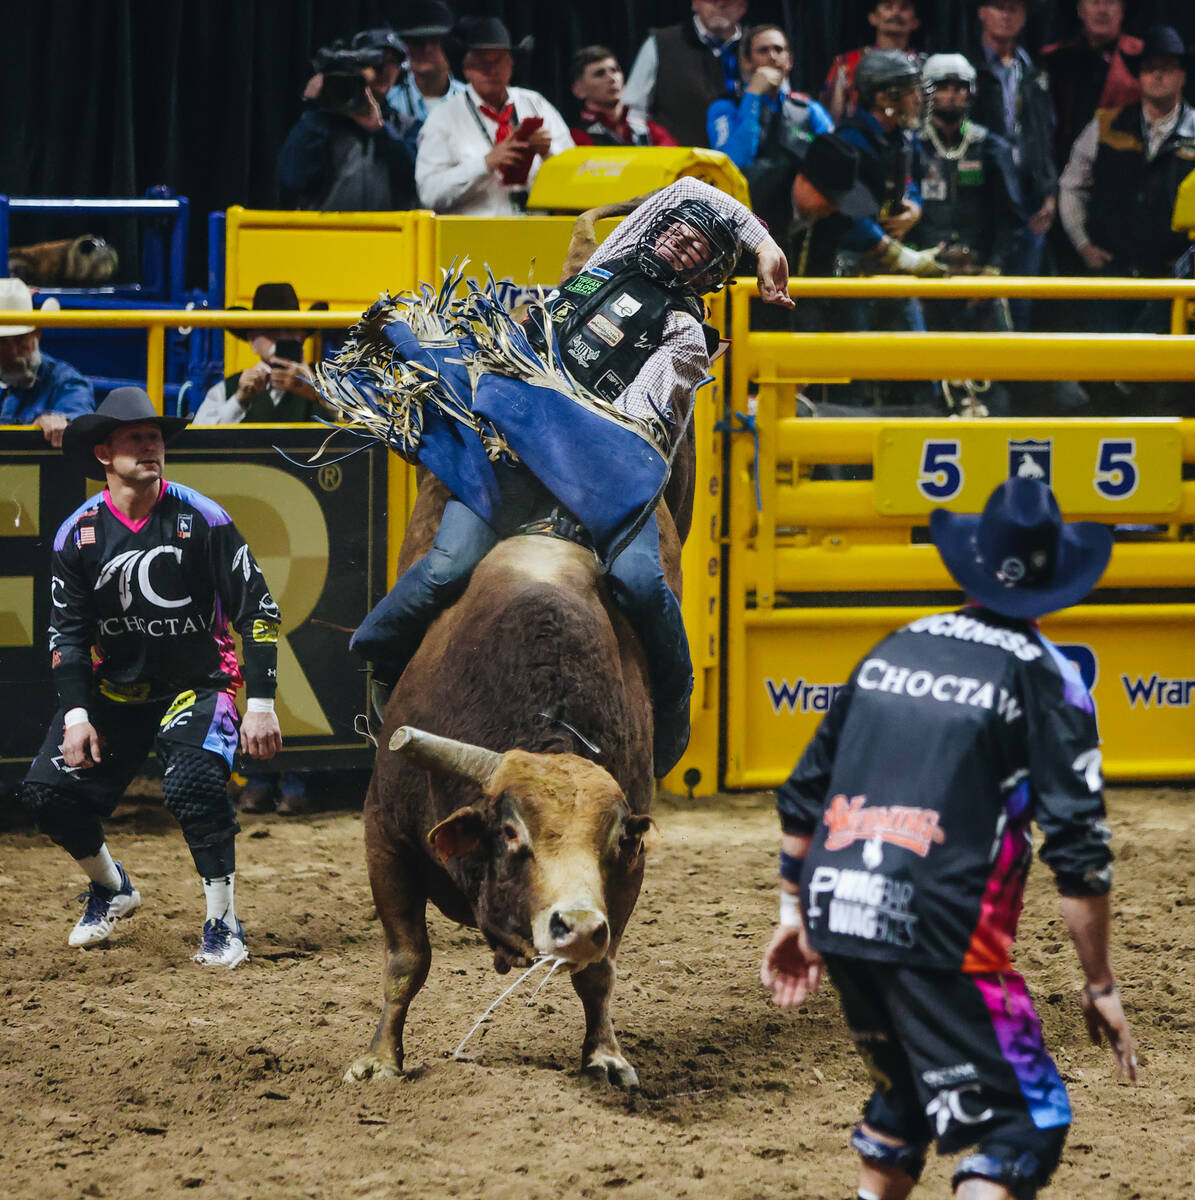 Tristen Hutchings rides the bull during the National Finals Rodeo at the Thomas & Mack Cent ...